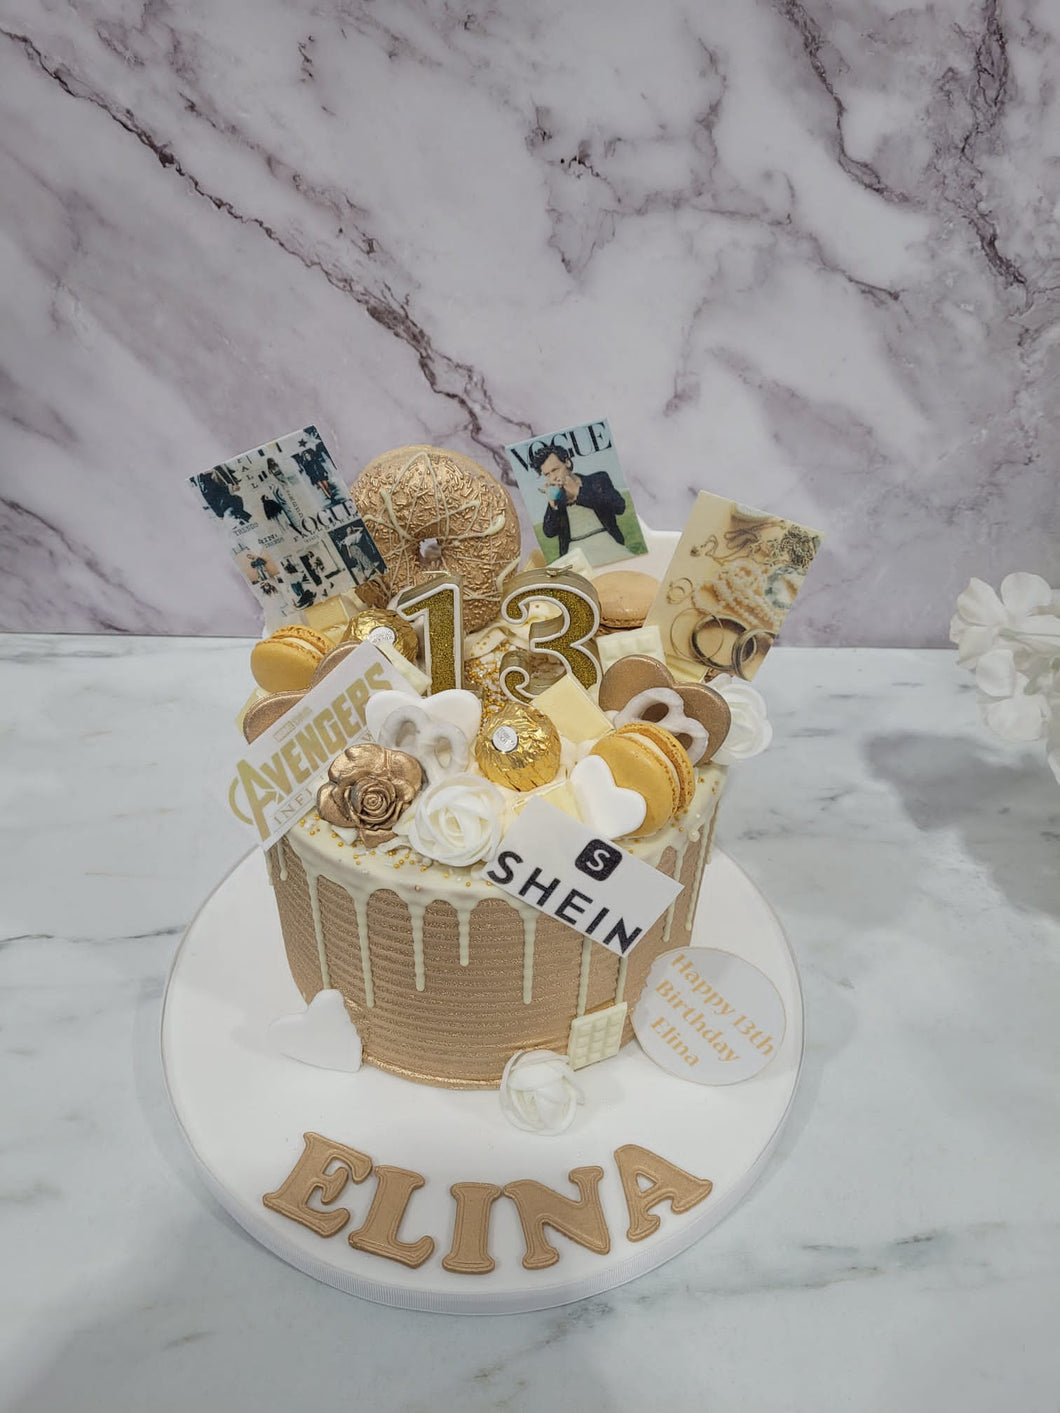 Gold, Bling, Boujee Themed drip cake